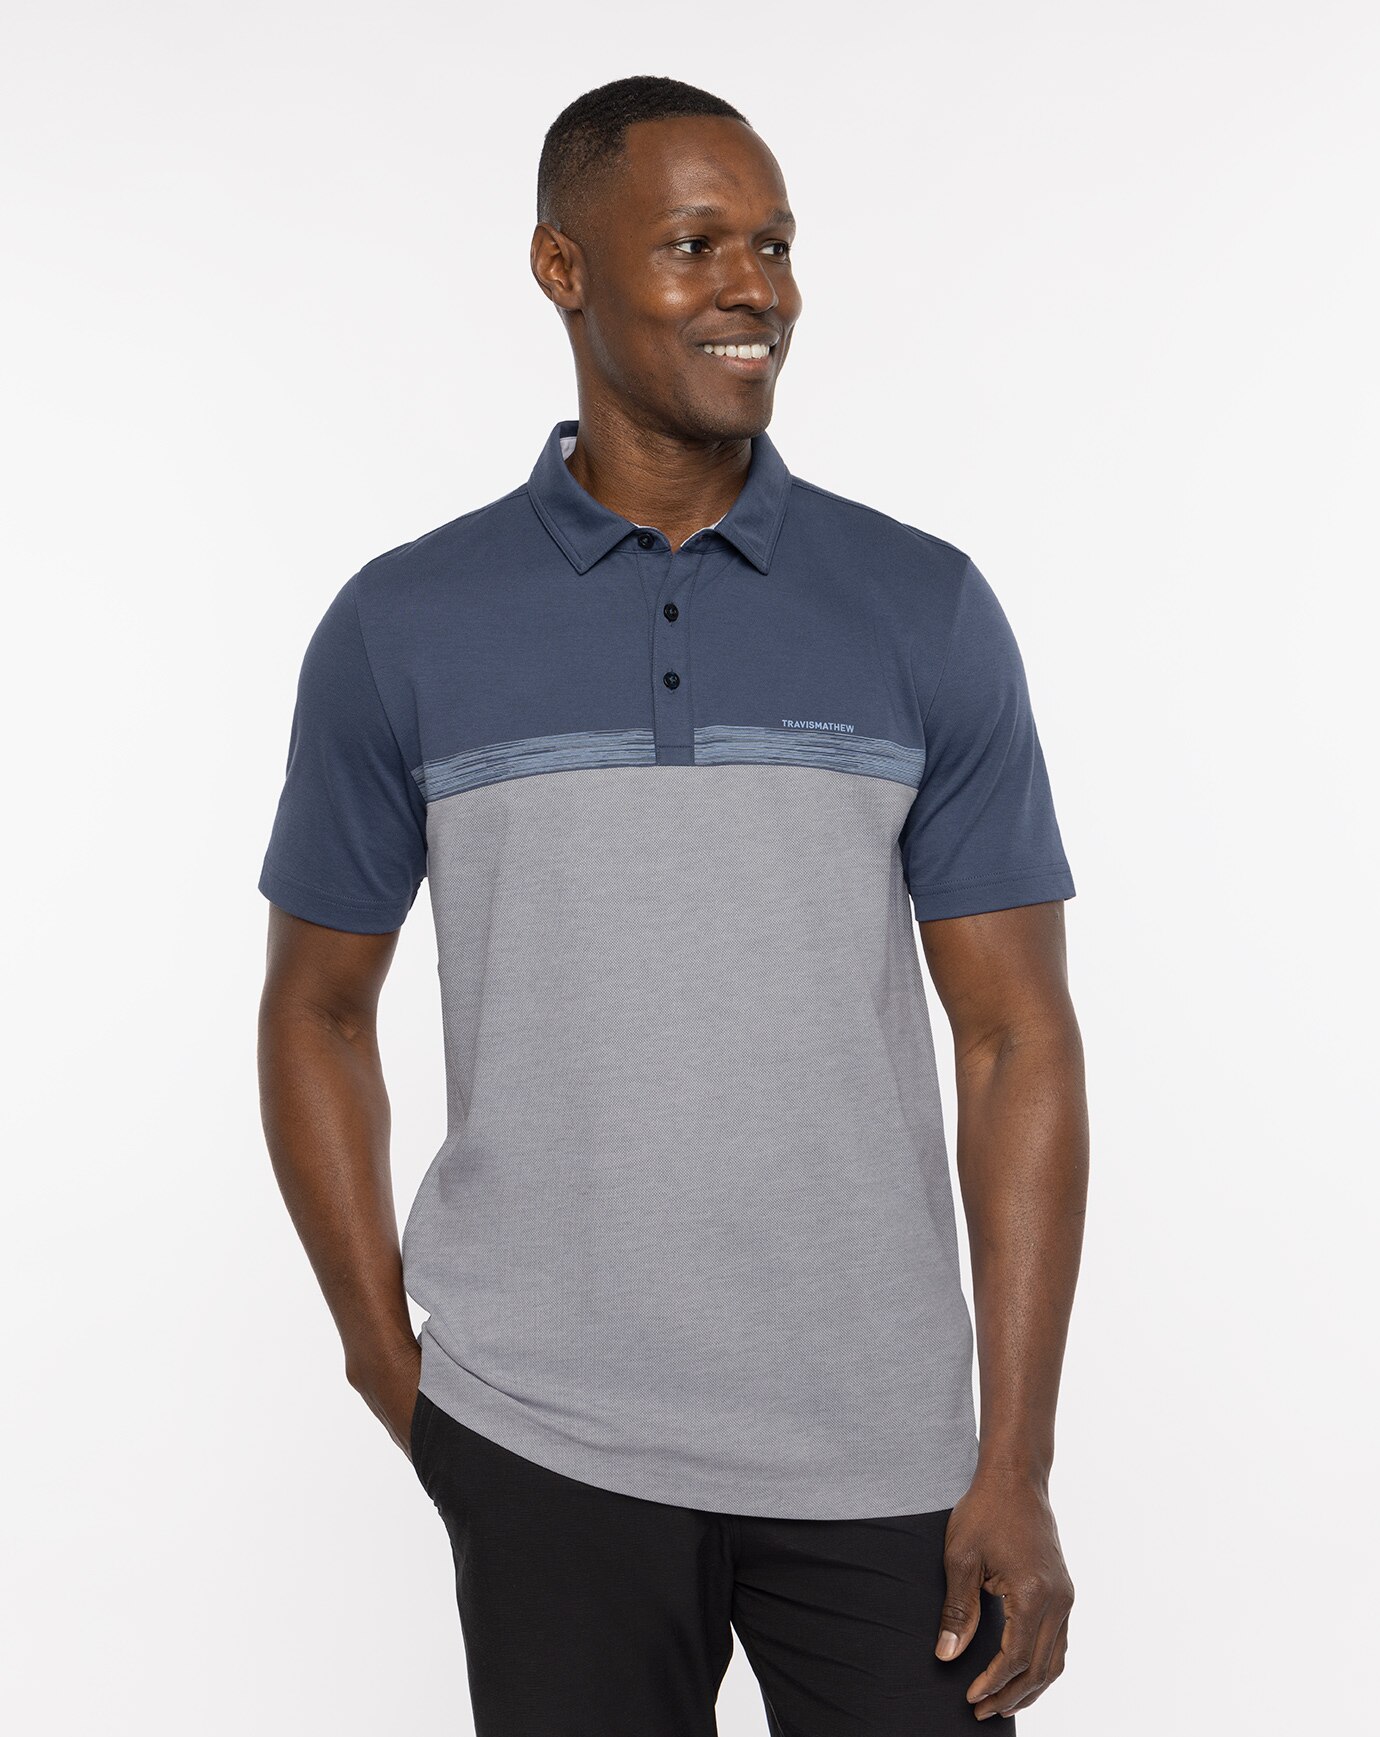 Related Product - LAST MINUTE POLO